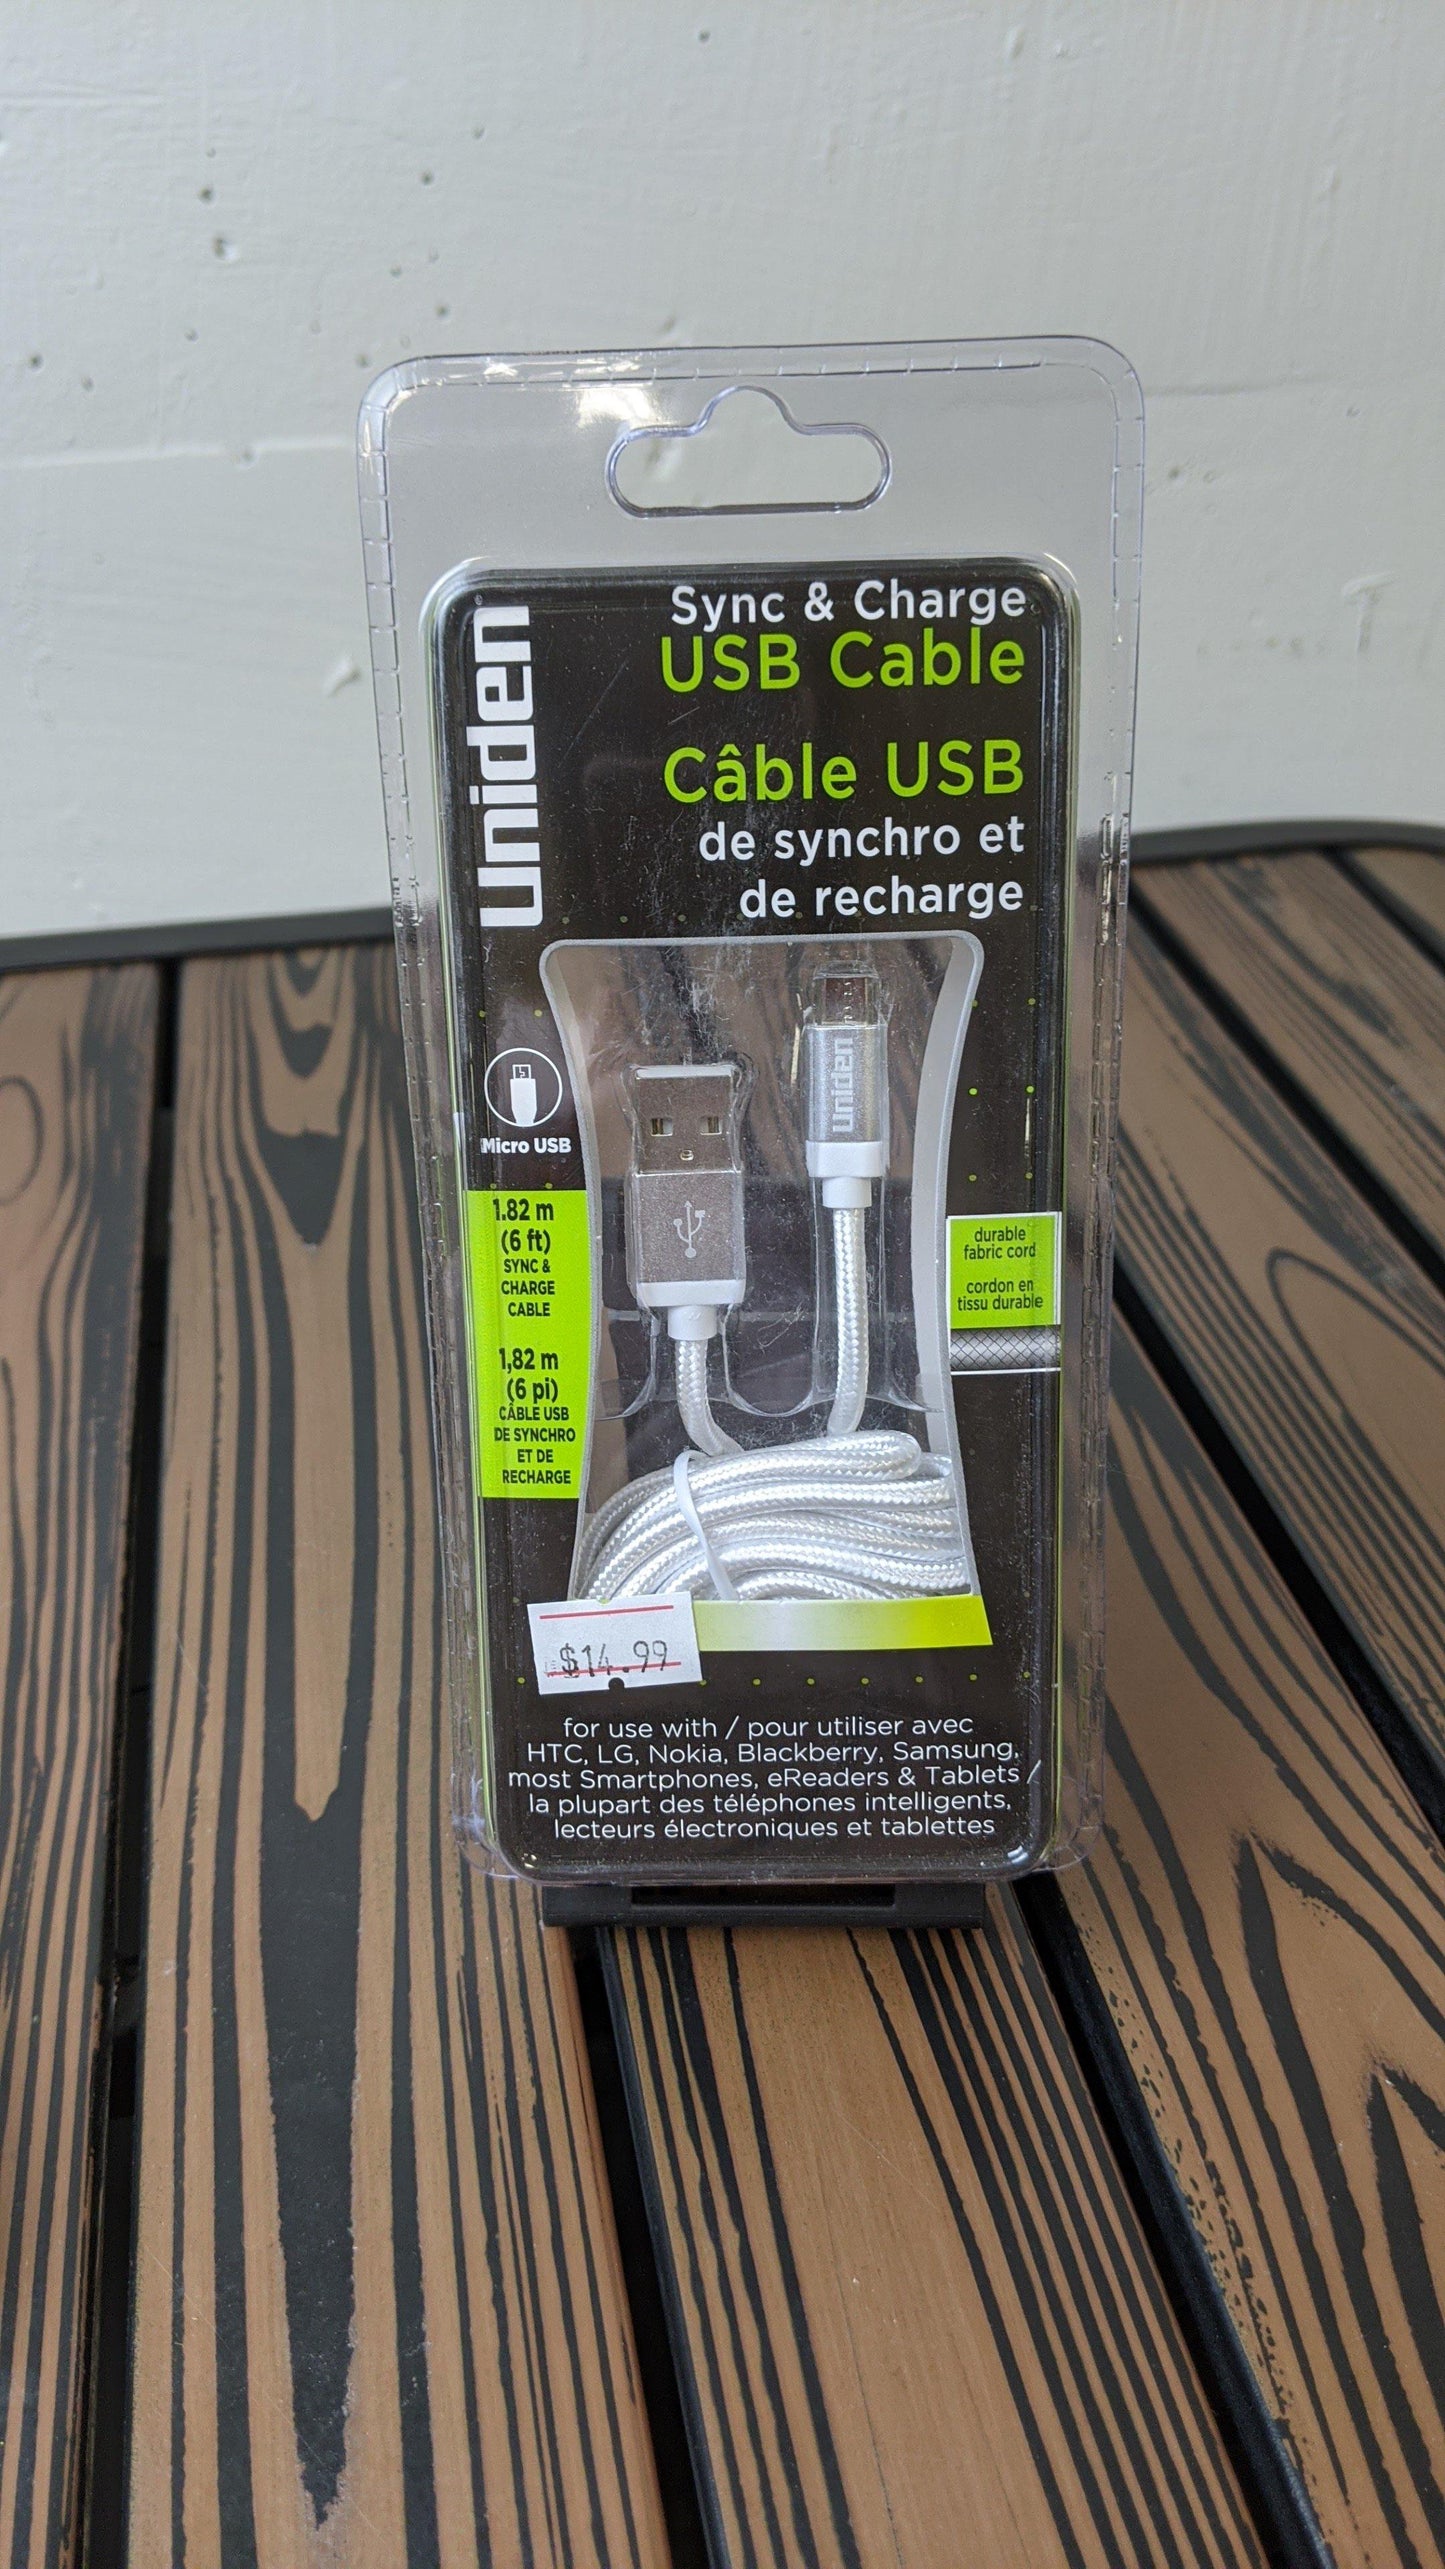 Uniden Sync and Charge USB Cable - PCMaster Pro 